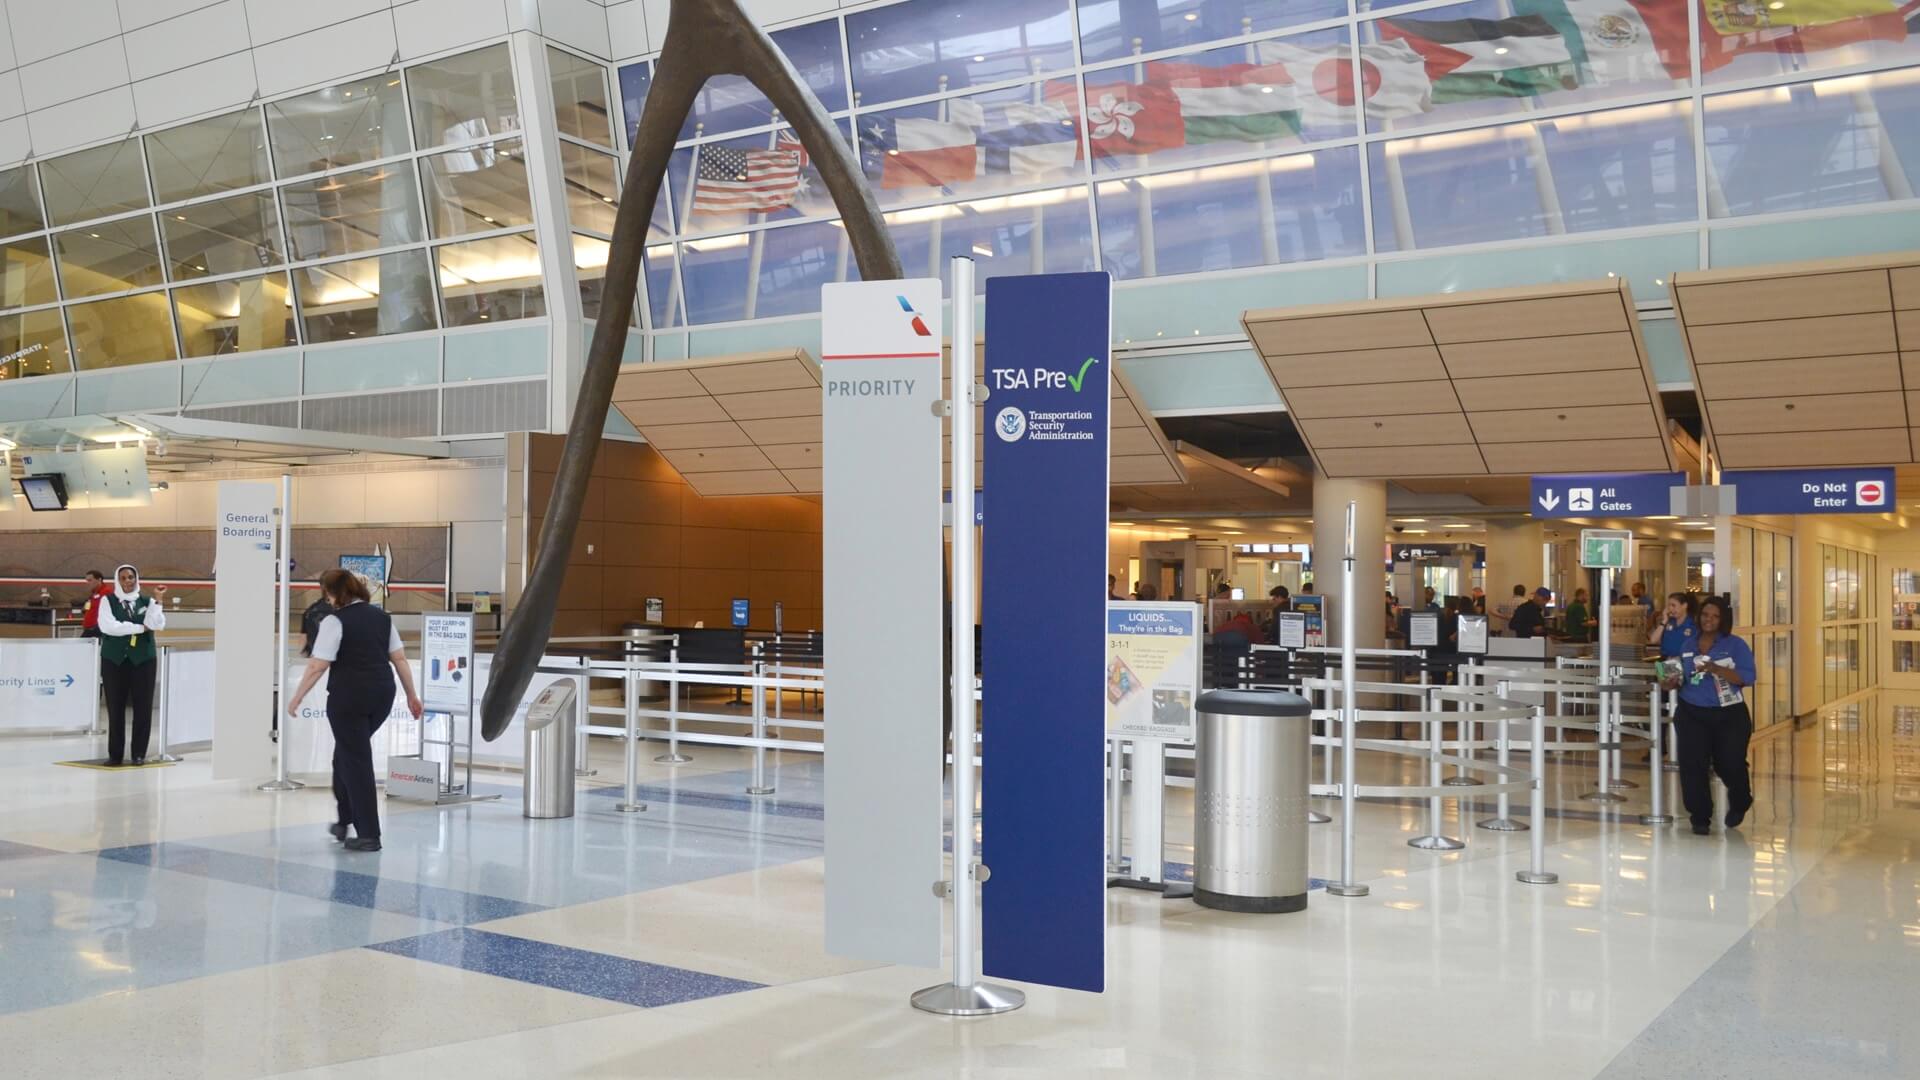 Airport,Queuing,RigidRail,MagneticBase,Stanchions,Banners,Signage,Directrac